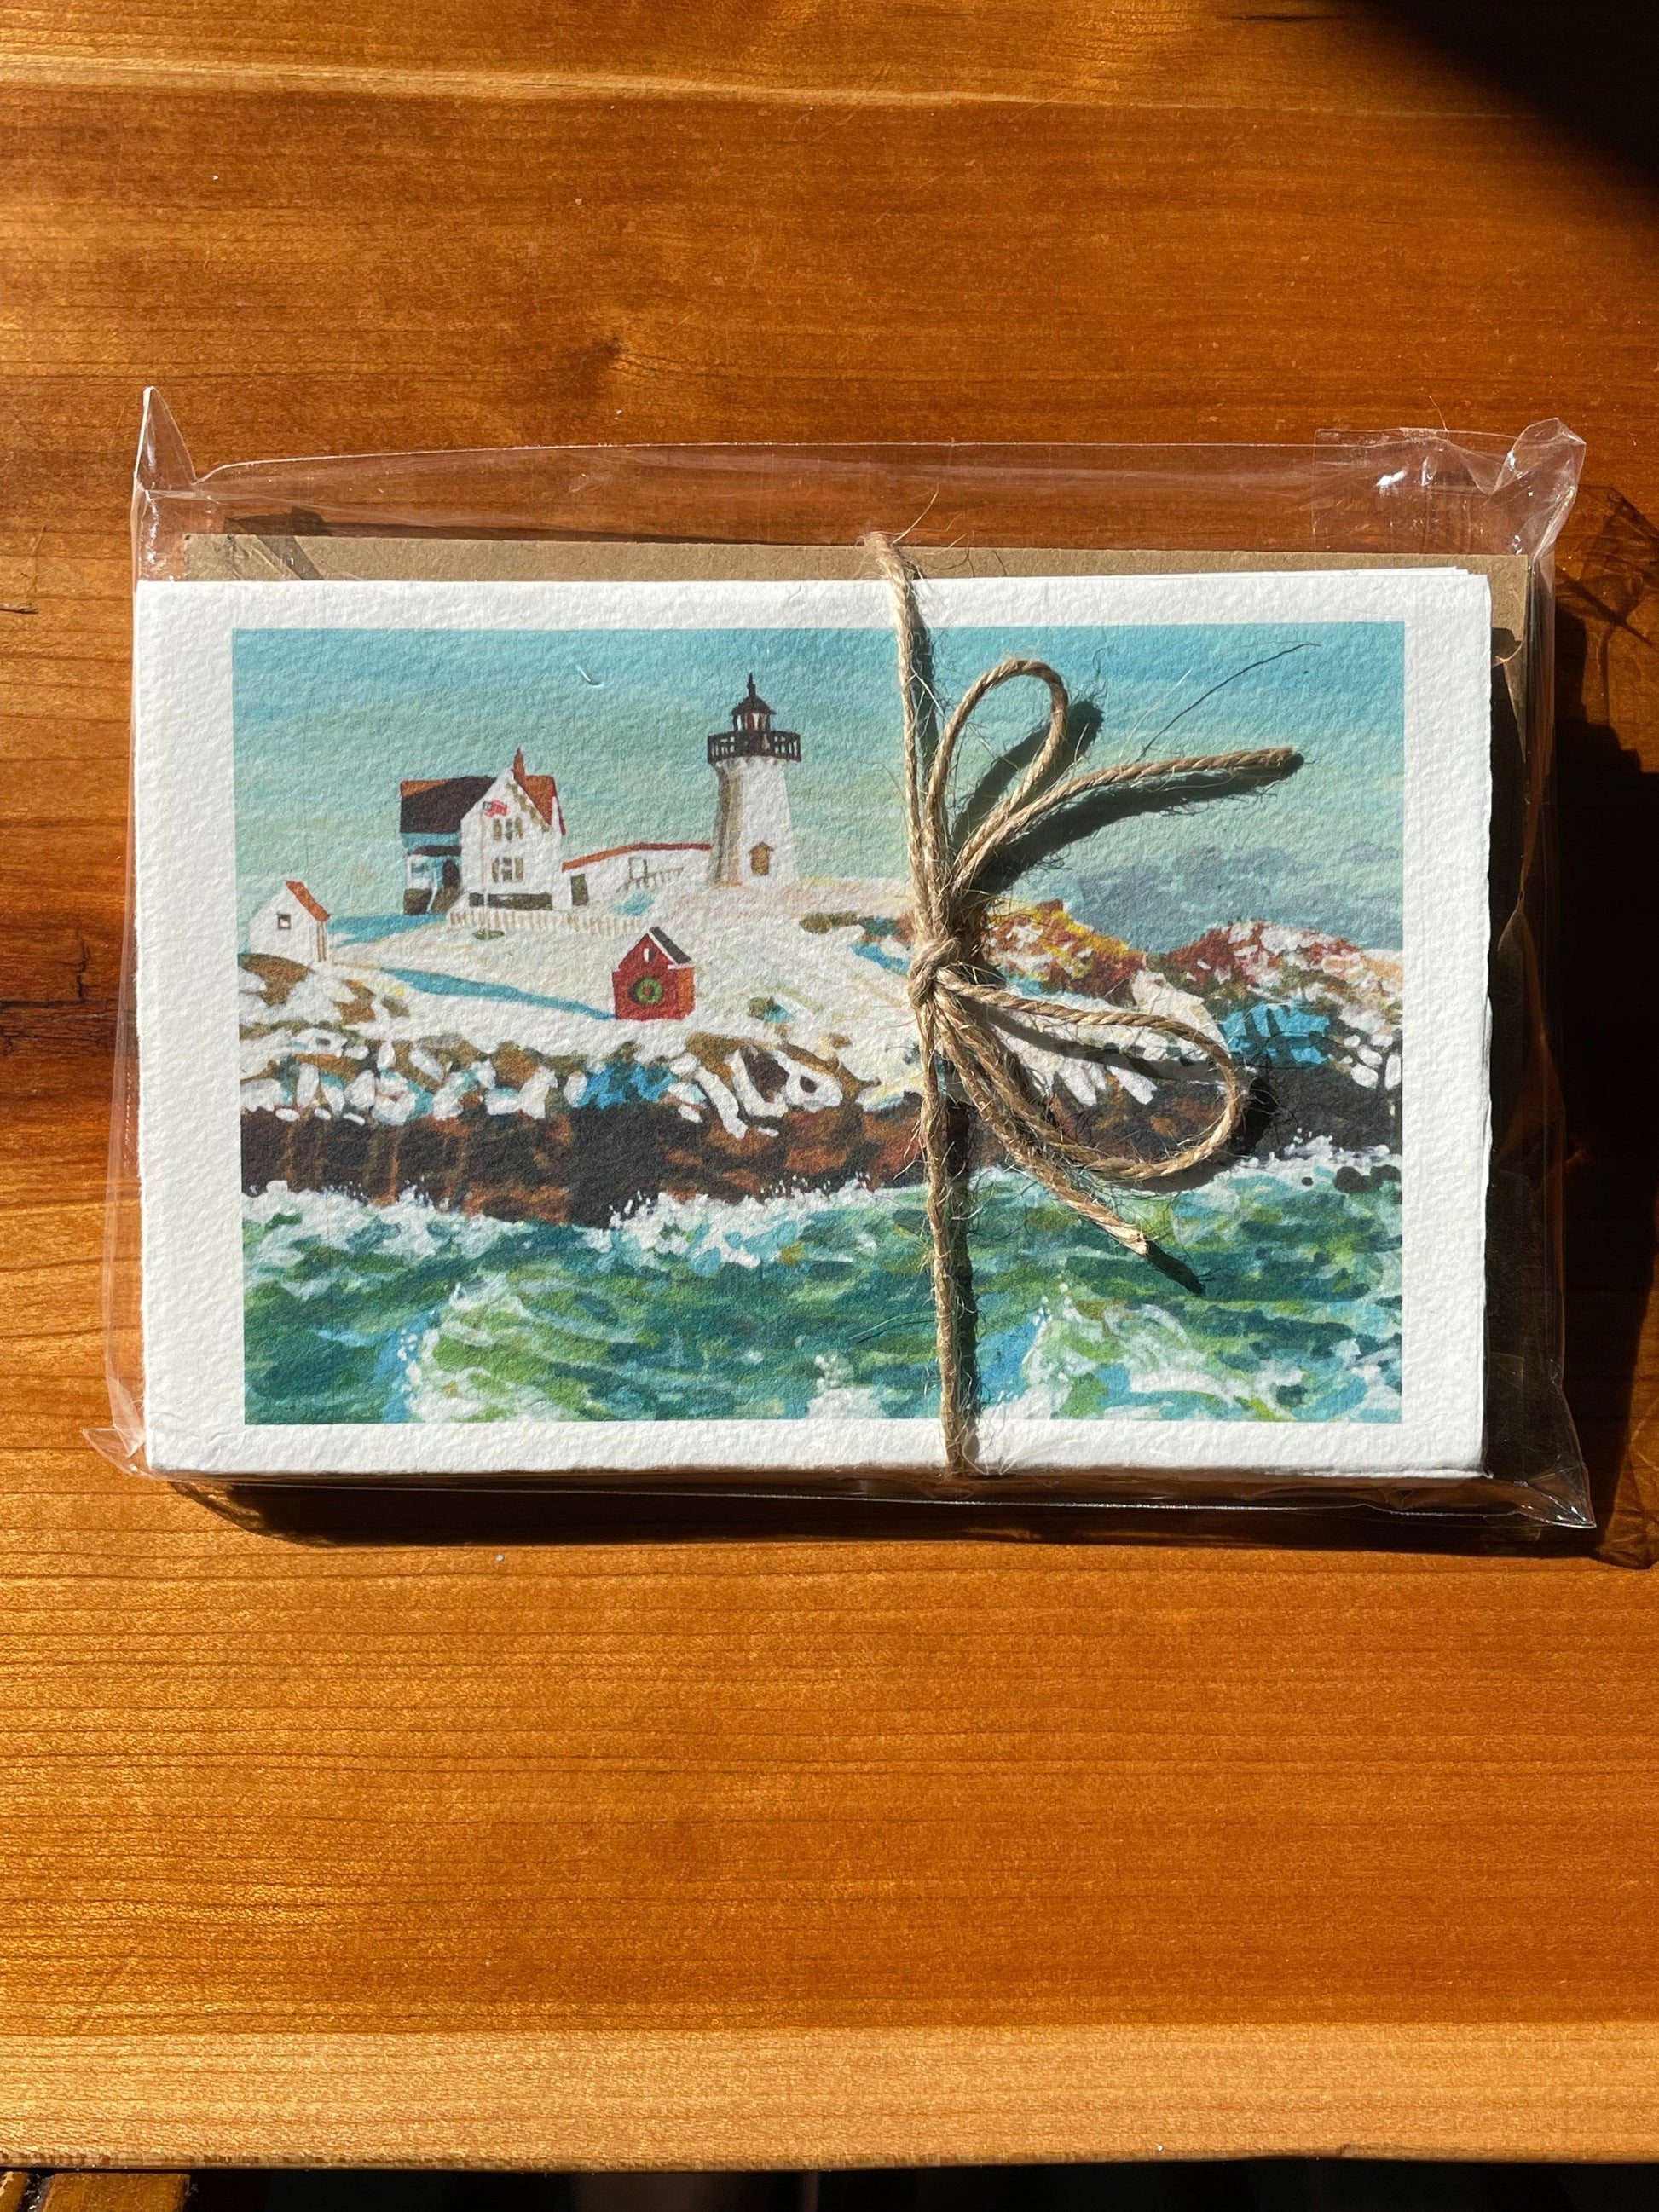 Print of handpainted nubble lighthouse by Brandy Cressey for Florence Farmstead. Nubble Lighthouse in York, Maine in the winter with Christmas wreath and crashing waves.